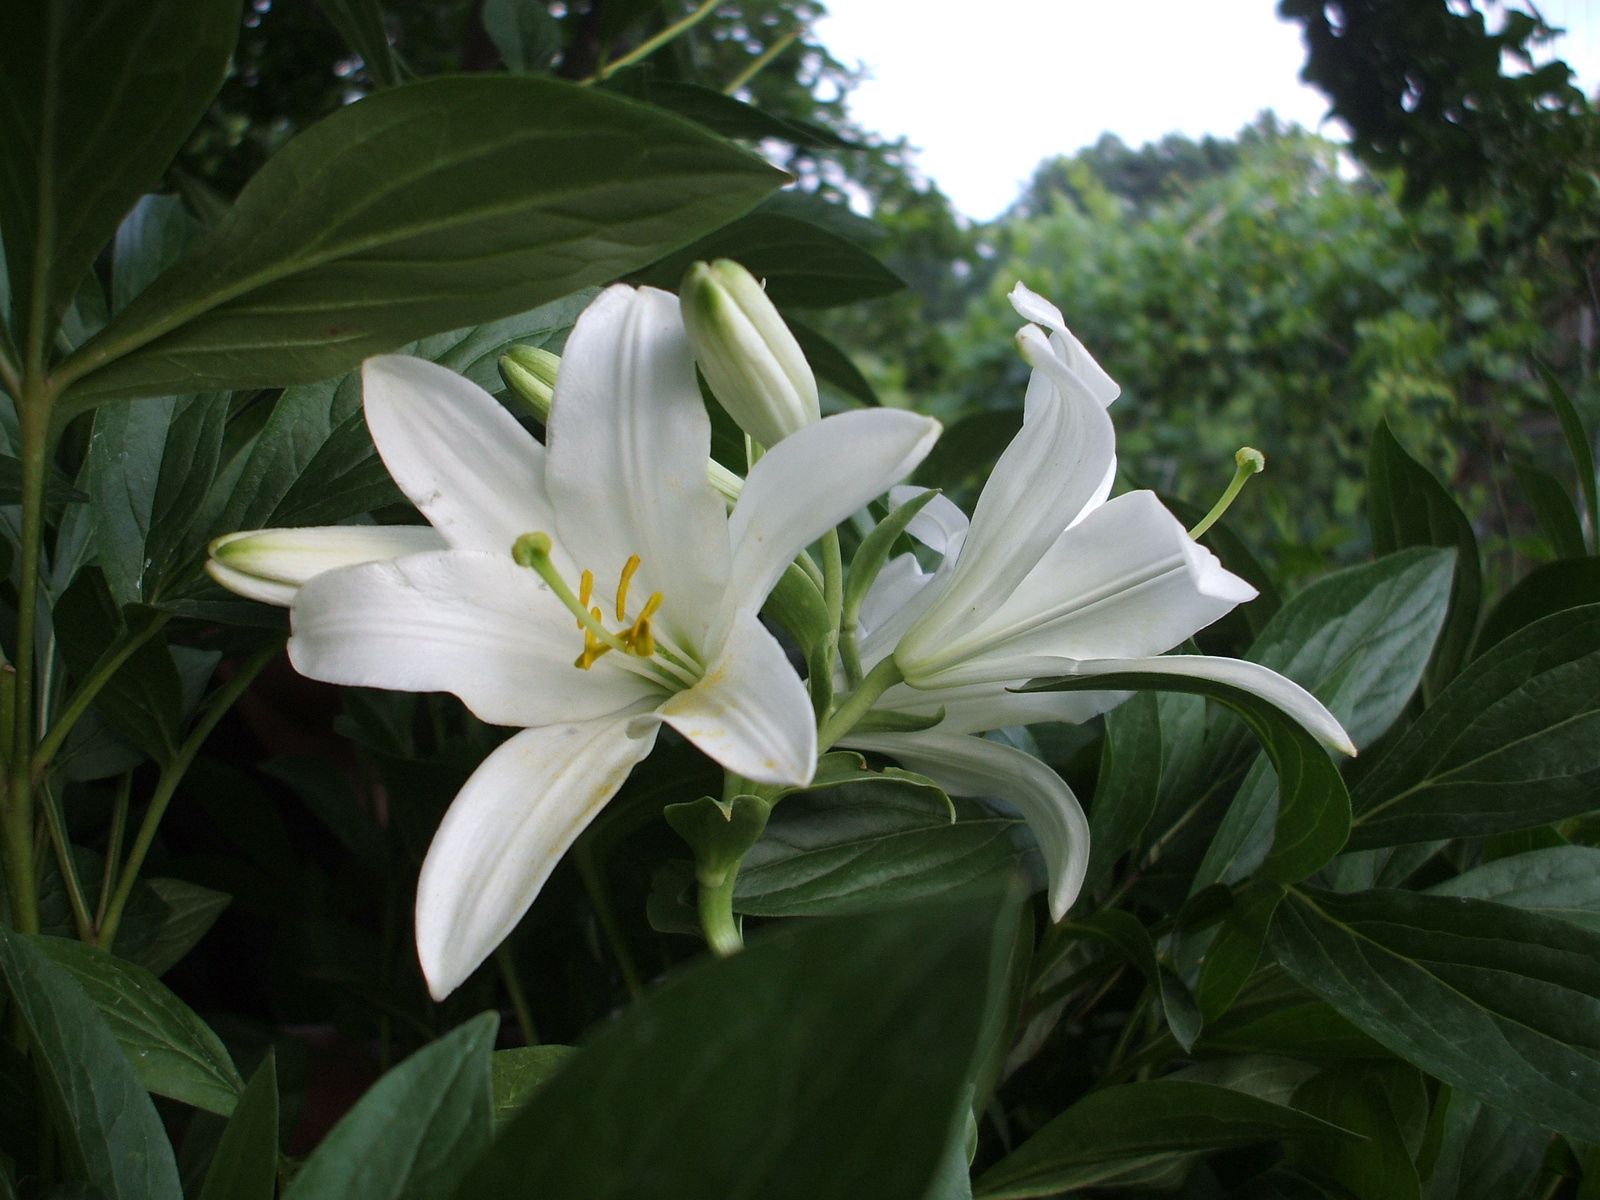 flowers, trees, lilies, white, park, greens, flower bed, flowerbed